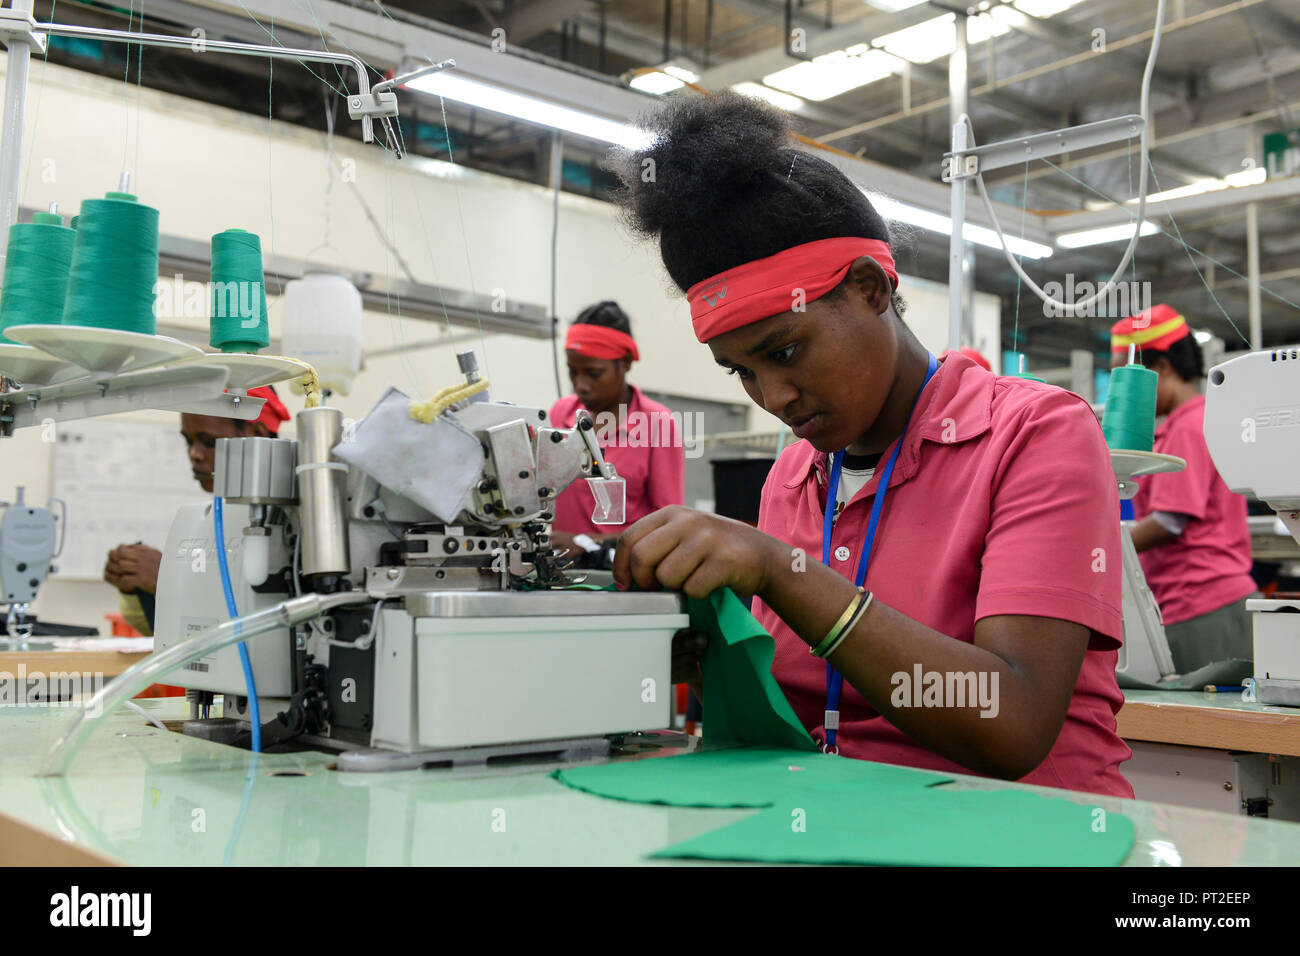 ETHIOPIA , Southern Nations, Hawassa or Awasa, Hawassa Industrial Park, chinese-built for the ethiopian government to attract foreign investors with low rent and tax free to establish a textile industry and create thousands of new jobs, taiwanese company Everest Textile Co. Ltd.produces textiles from synthetic fabric for export / AETHIOPIEN, Hawassa, Industriepark, gebaut durch chinesische Firmen fuer die ethiopische Regierung um die Hallen fuer Textilbetriebe von Investoren zu vermieten, taiwanesische Firma Everest Textile Co. Ltd. produziert Textilien aus synthetischen Stoffen fuer den Expor Stock Photo